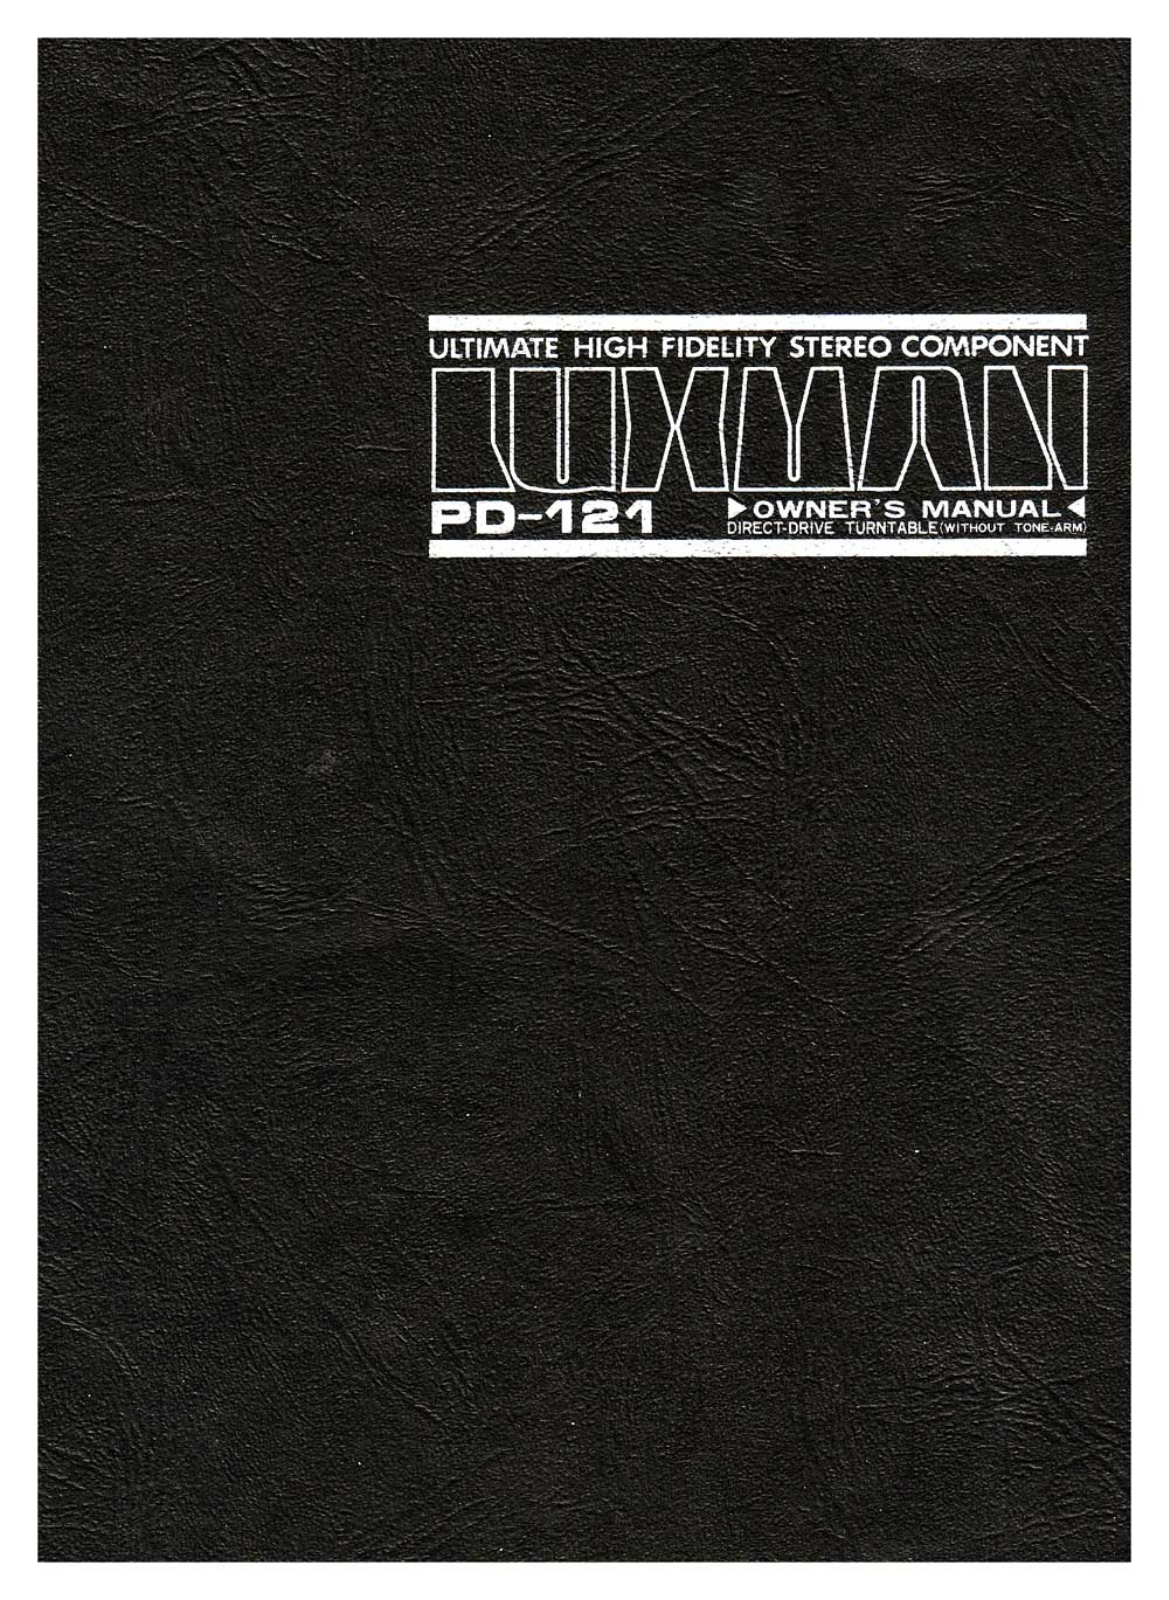 Luxman PD-121 Owners manual